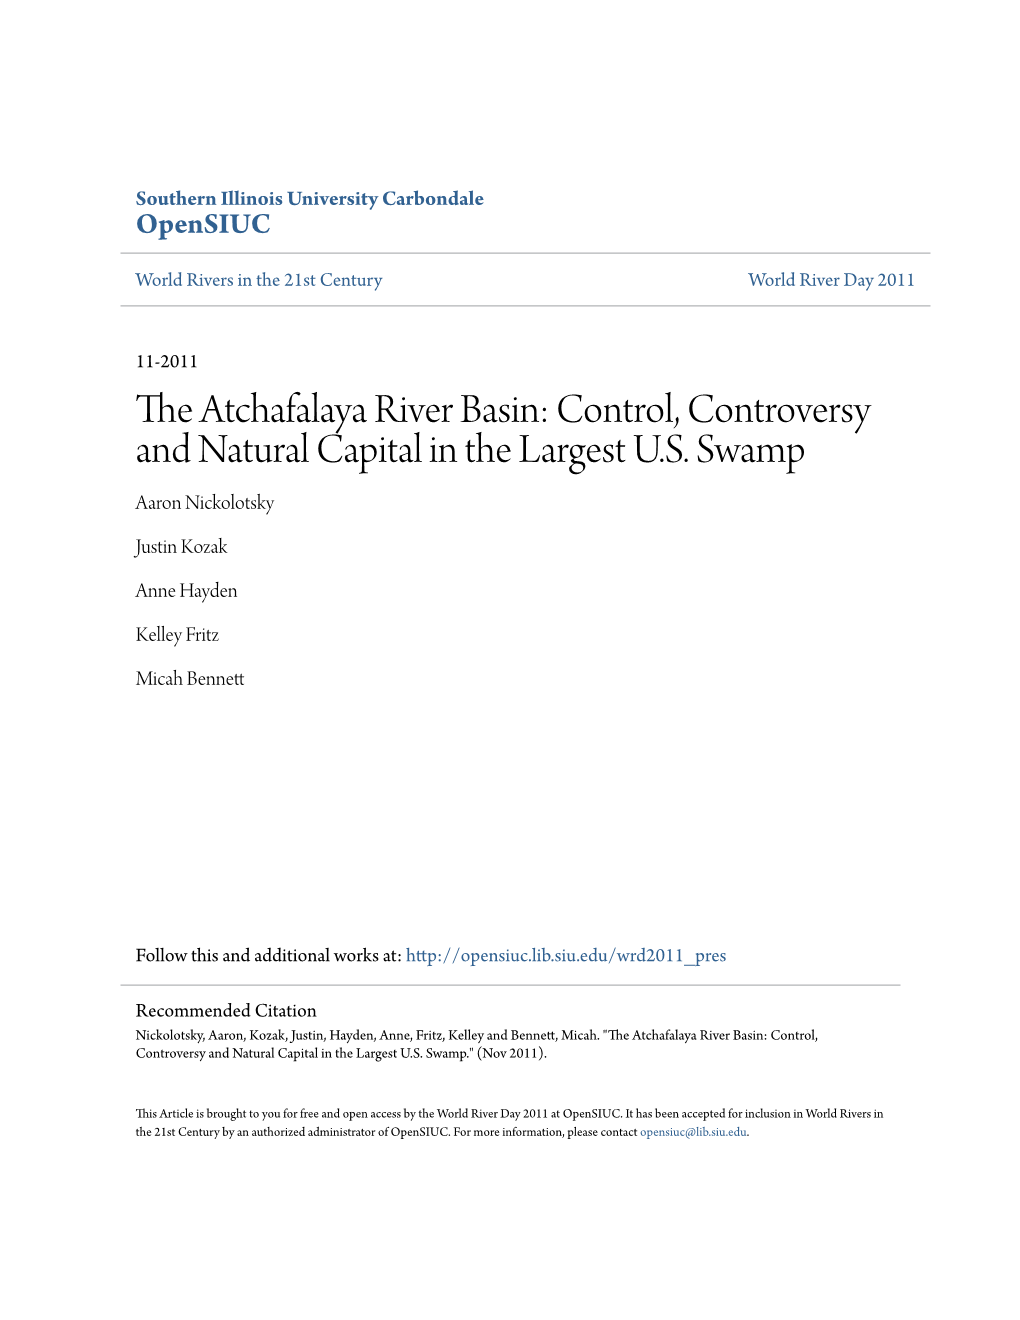 The Atchafalaya River Basin: Control, Controversy and Natural Capital in the Largest U.S